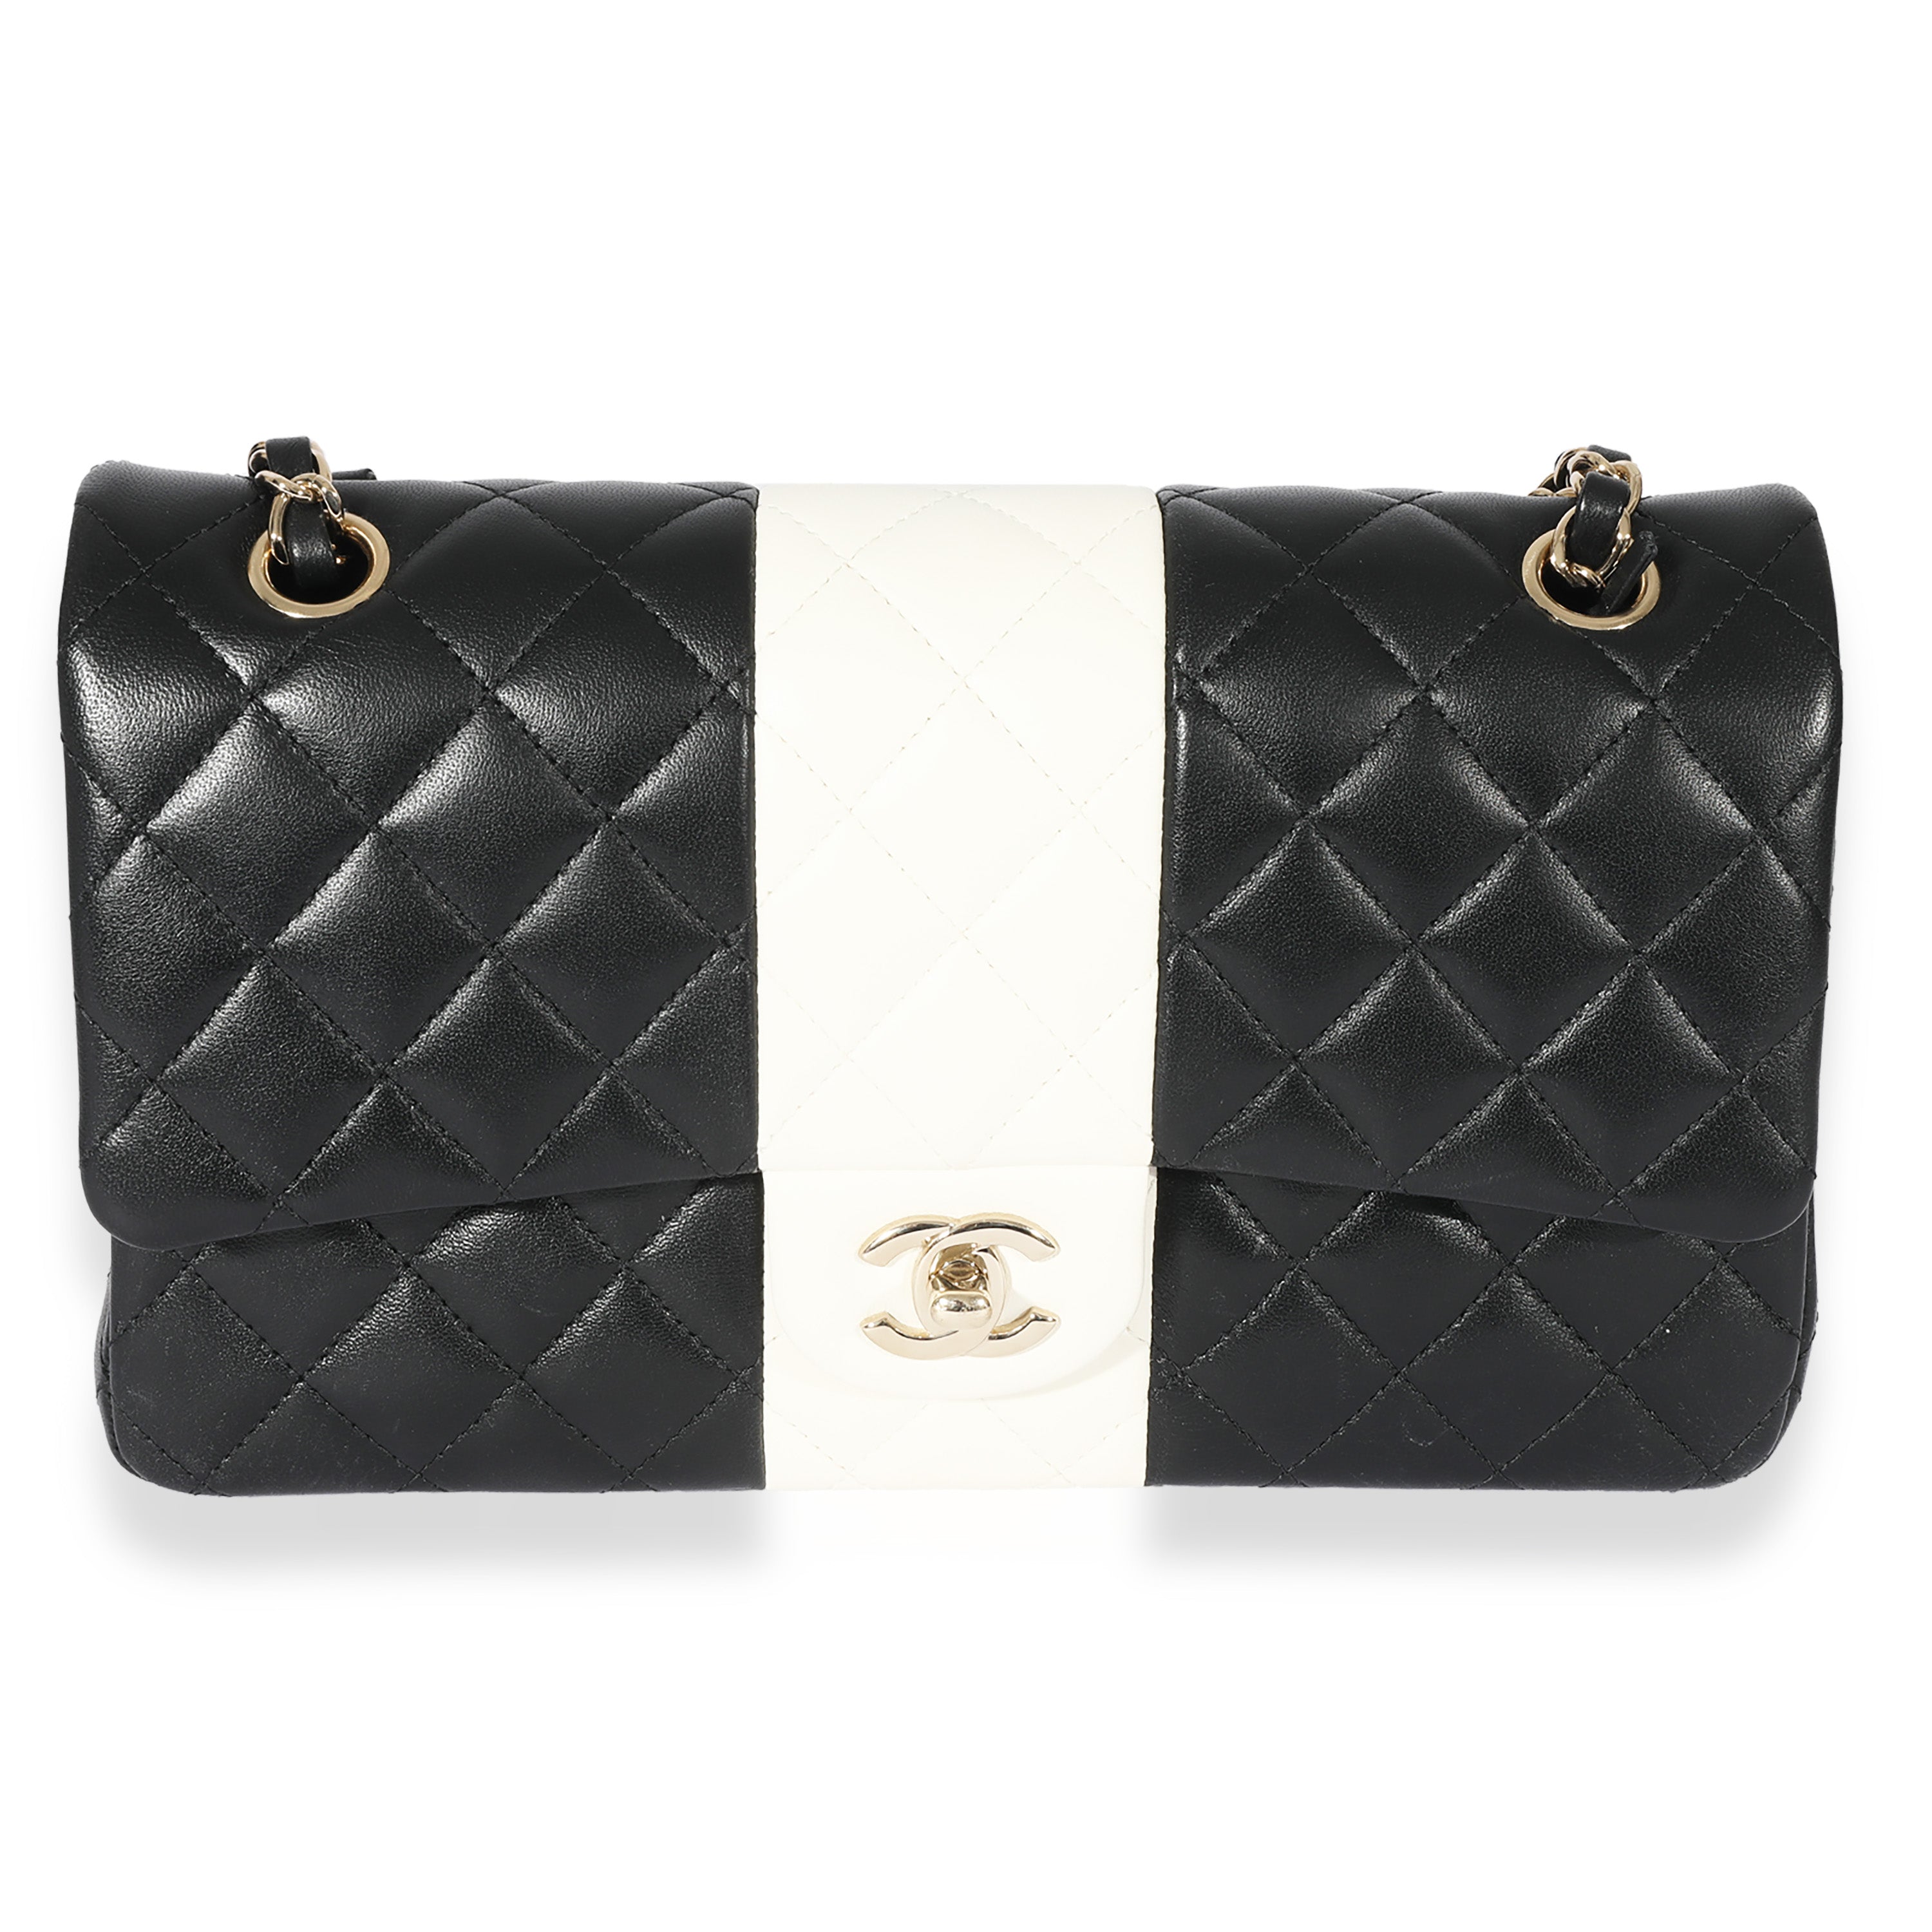 Chanel Grey Quilted Leather Mini Accordion Flap Bag